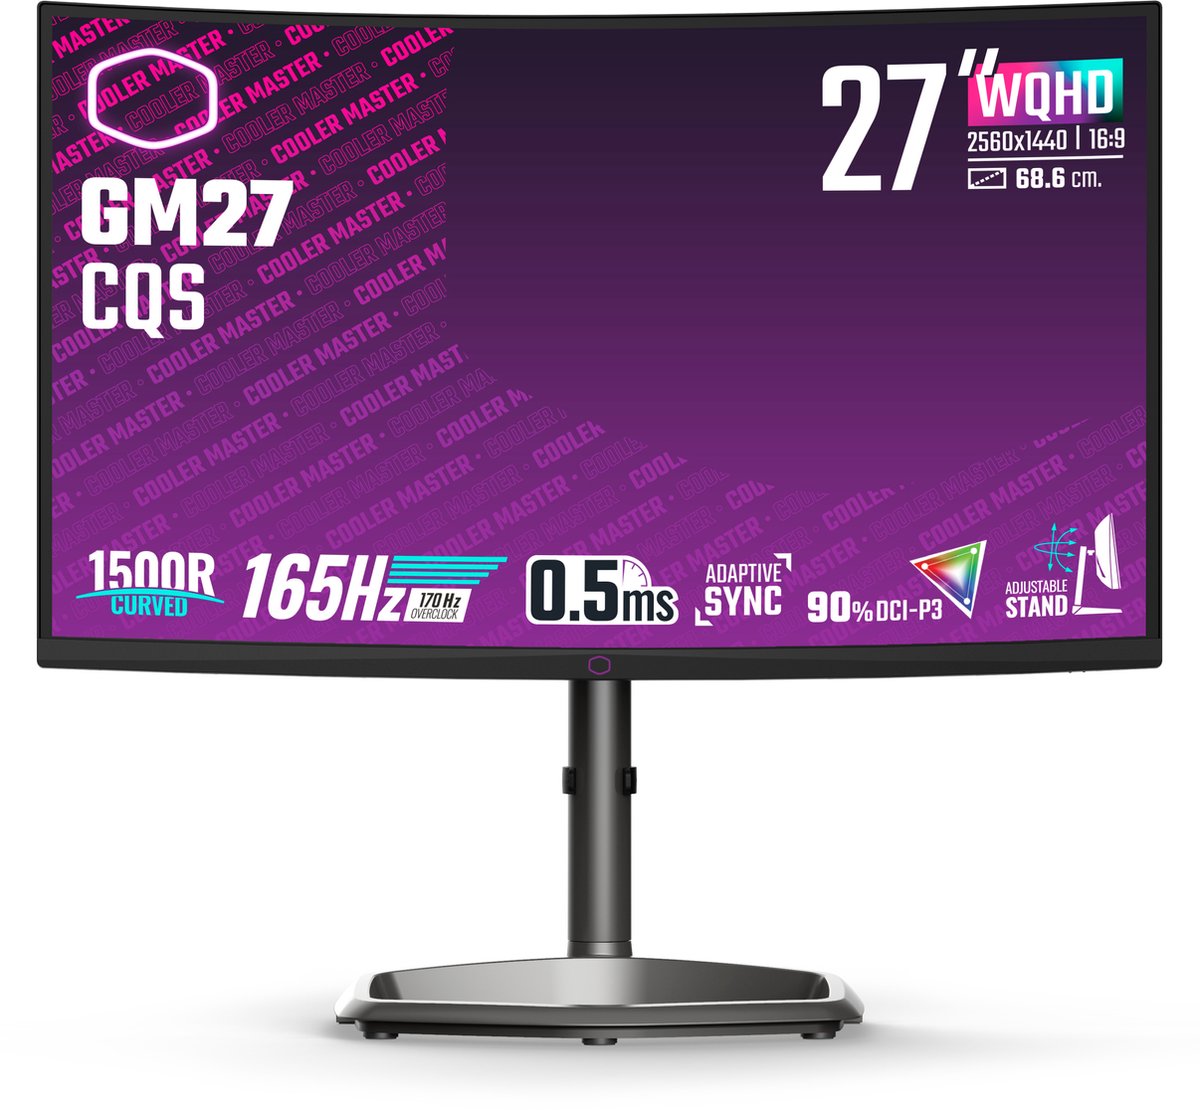 Cooler Master GM27-CQS - WQHD VA Curved 165Hz Gaming Monitor - 27 Inch